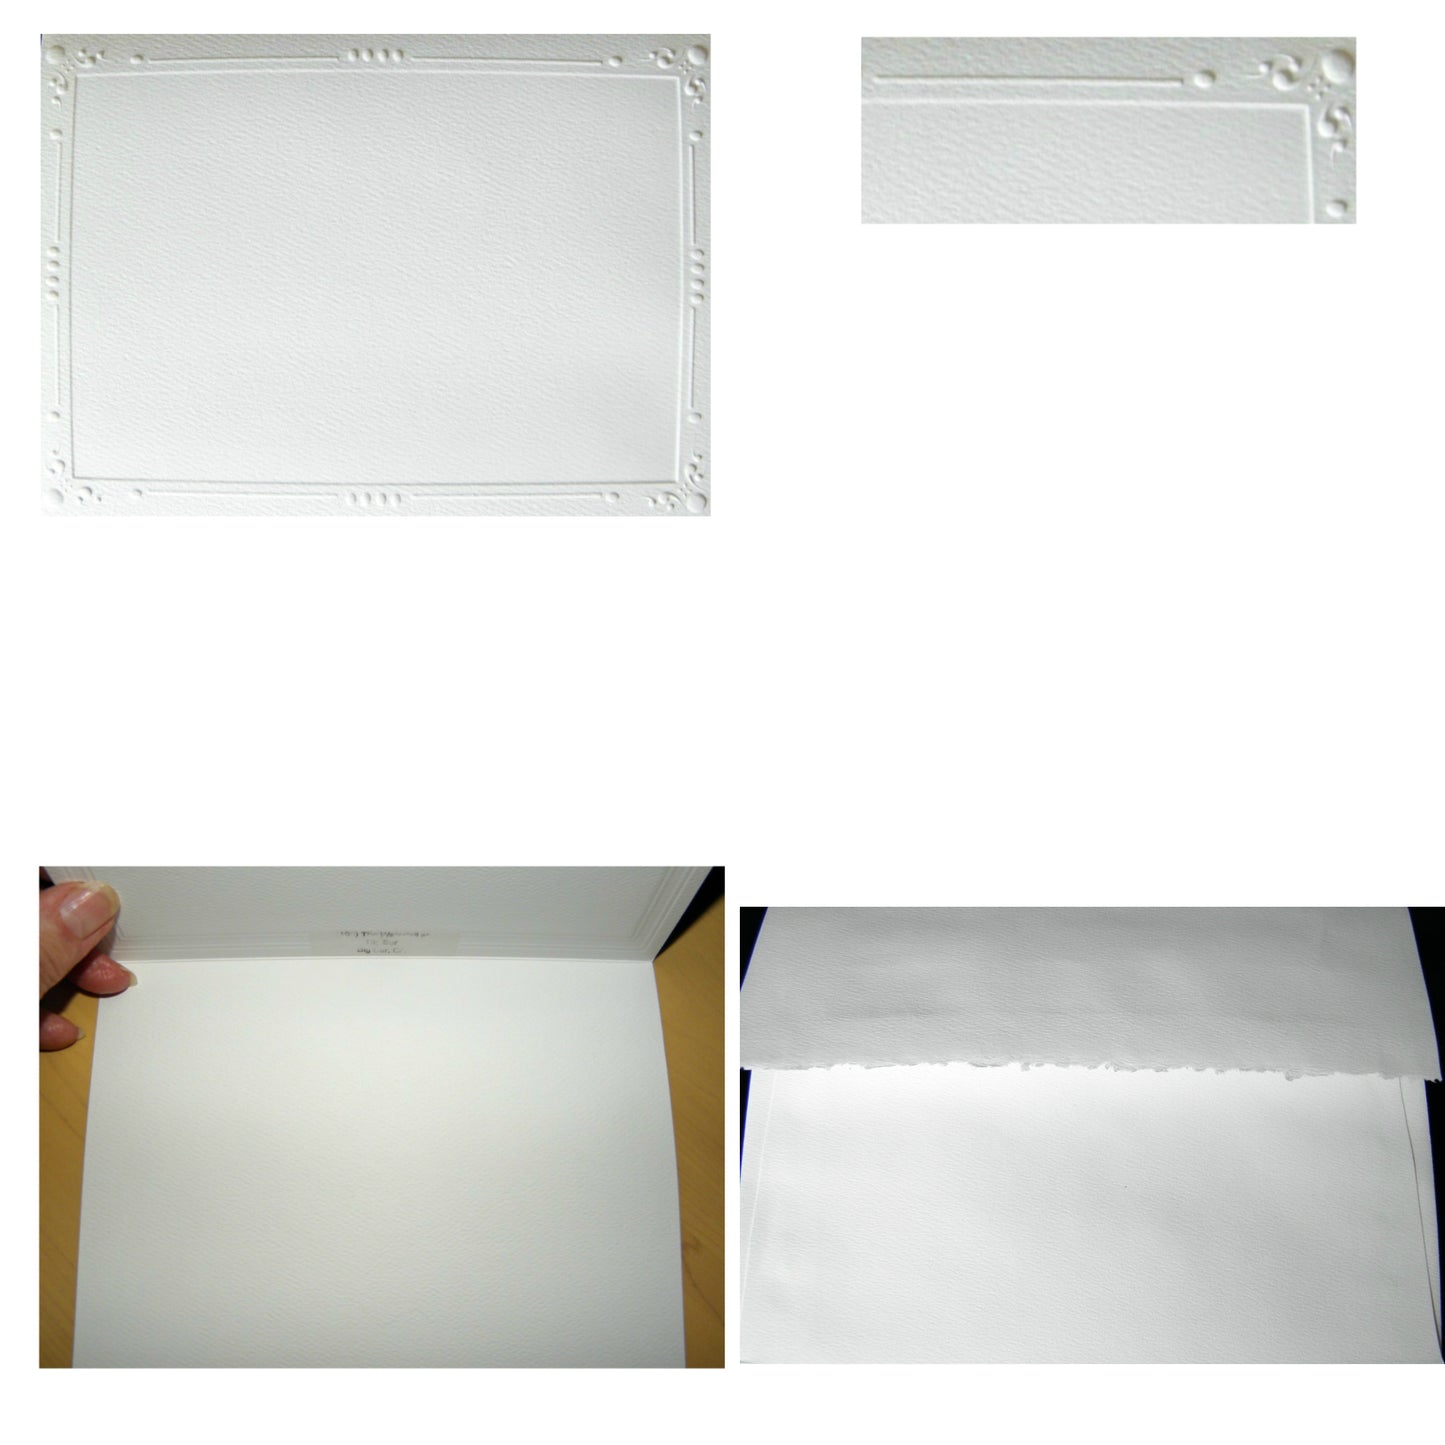 A collage of the Decorative card stock and envelope